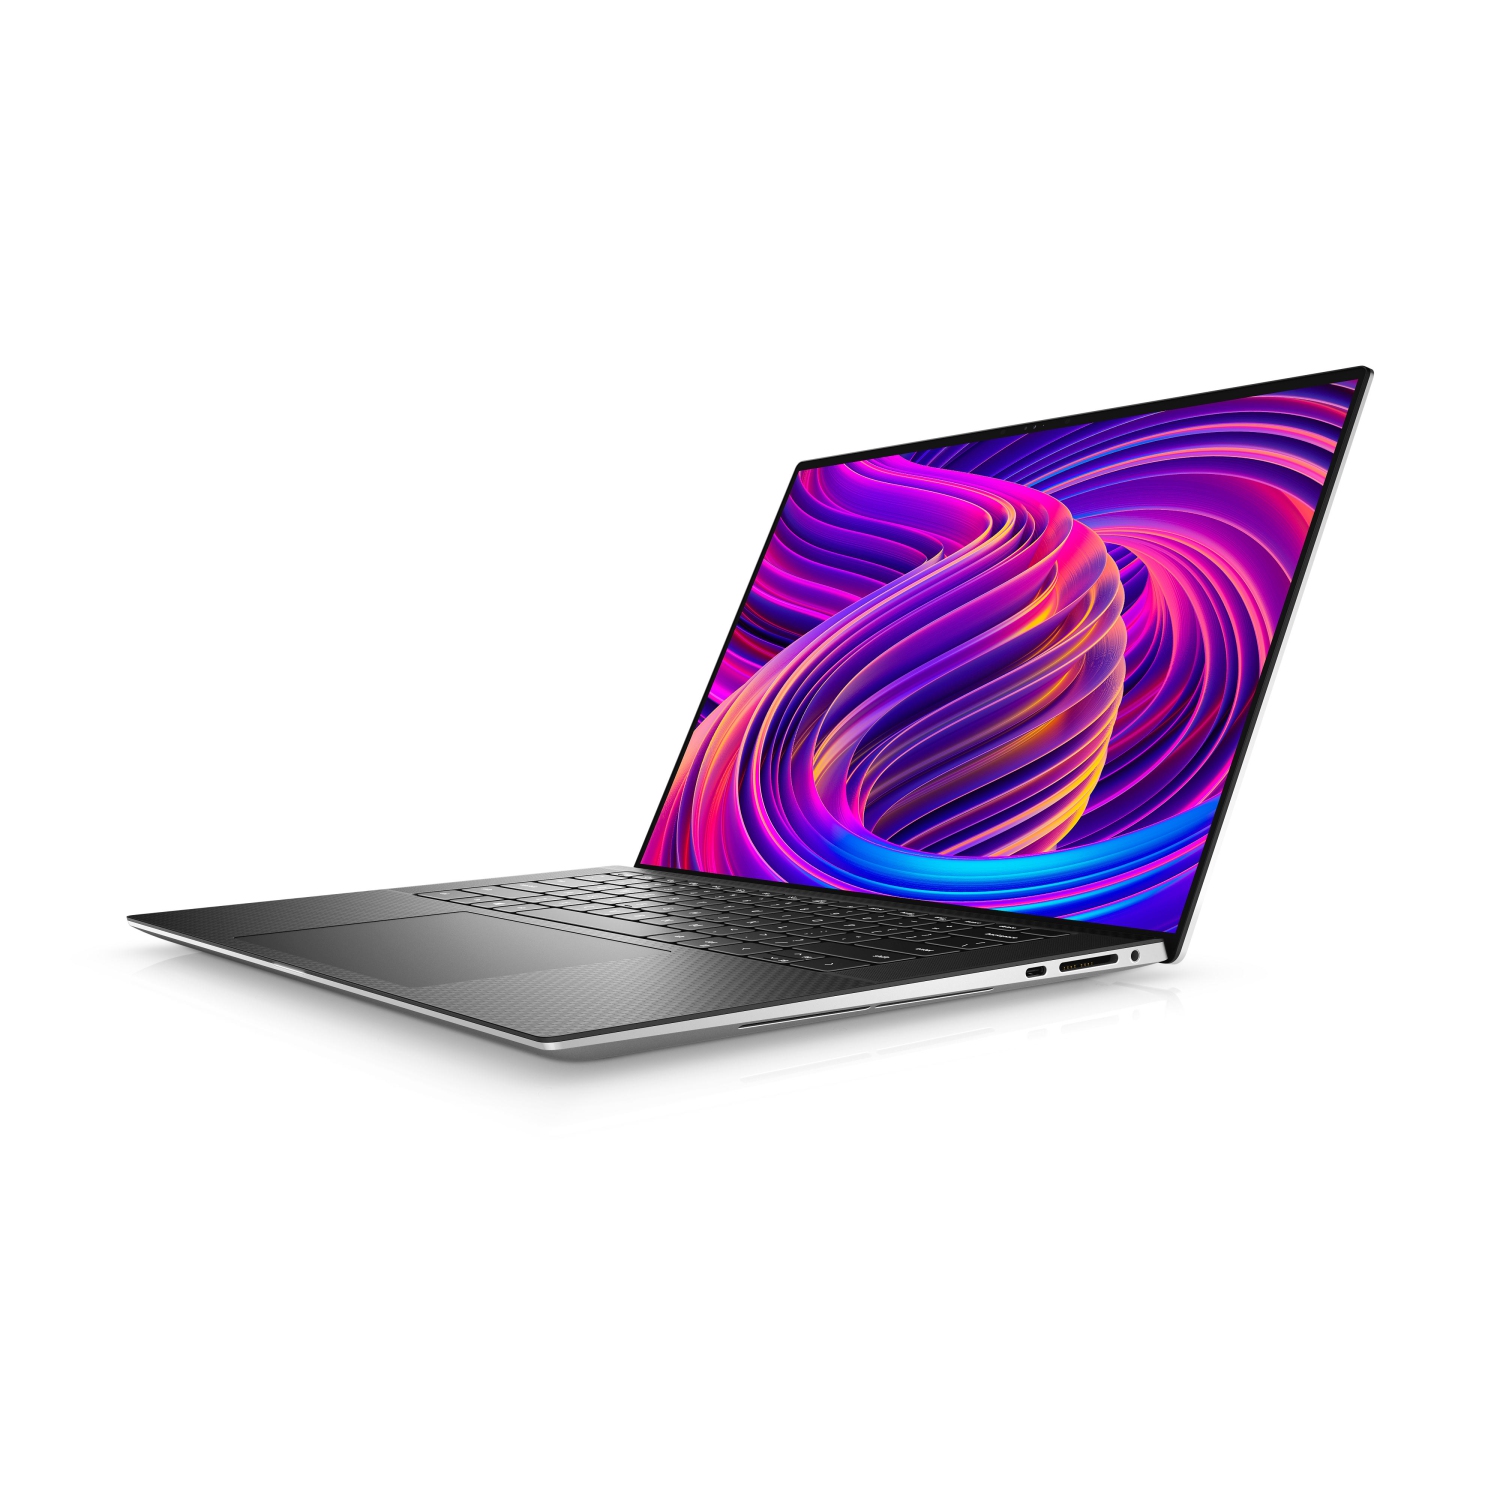 Refurbished (Excellent) - Dell XPS 15 9510 Laptop (2021) | 15.6" FHD+ | Core i9 - 512GB SSD - 16GB RAM - 3050 Ti | 8 Cores @ 4.9 GHz - 11th Gen CPU Certified Refurbished